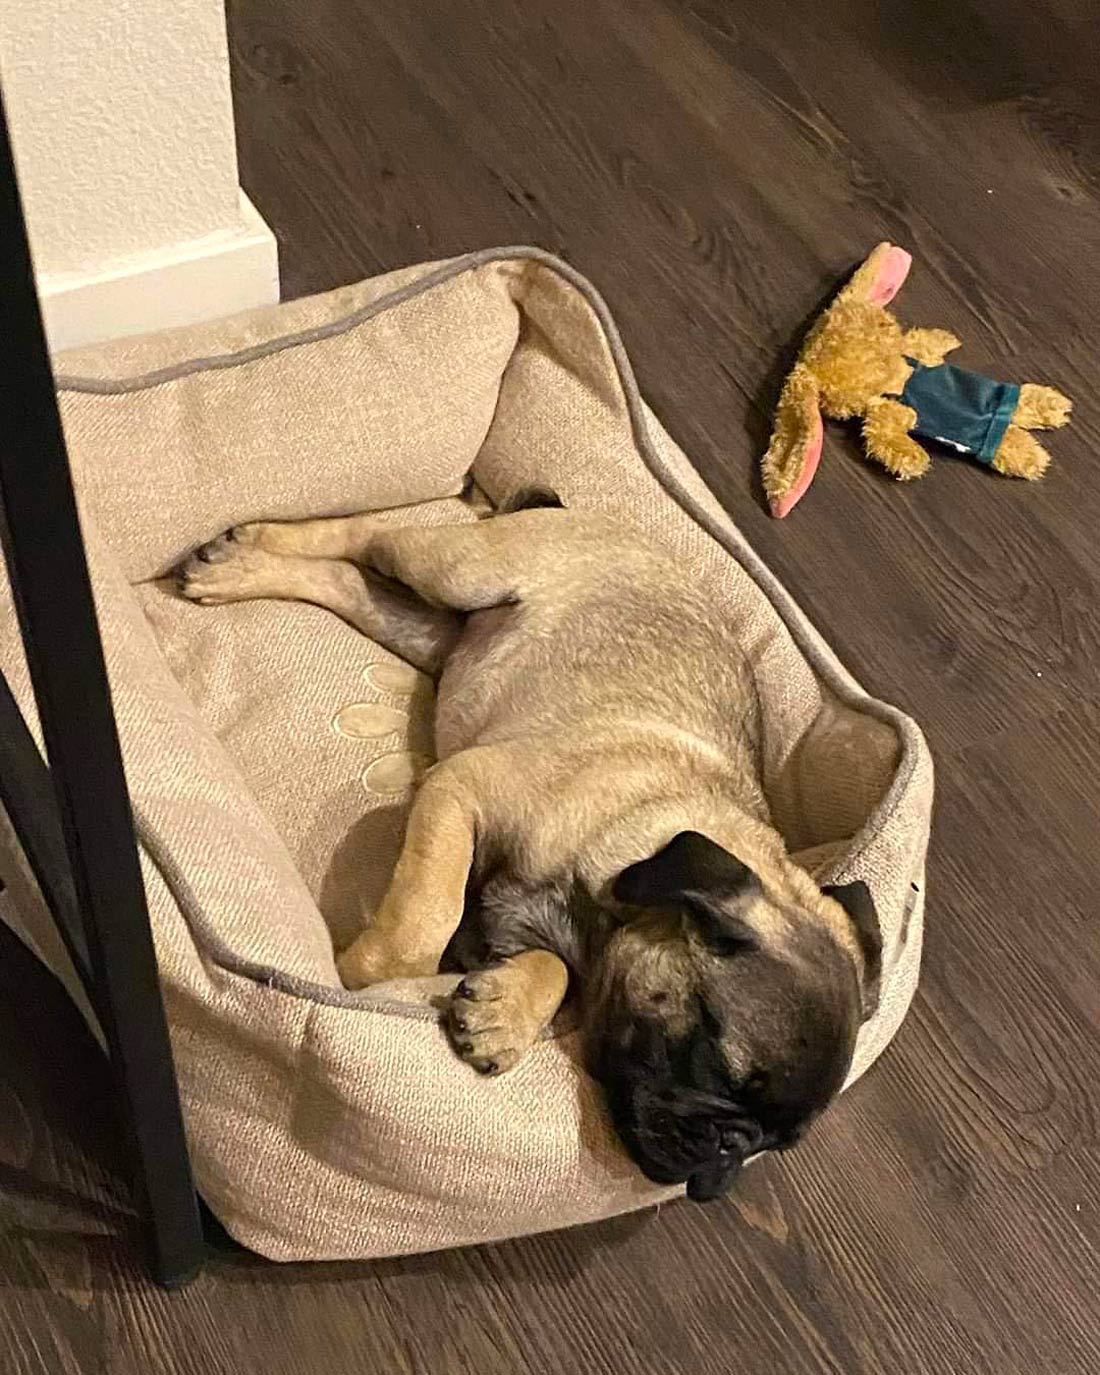 Meet Brodie. He’s a pug puppy – a crazy Lil dude – according to San Antonio, TX dog mom Jessica and her son Gavin.